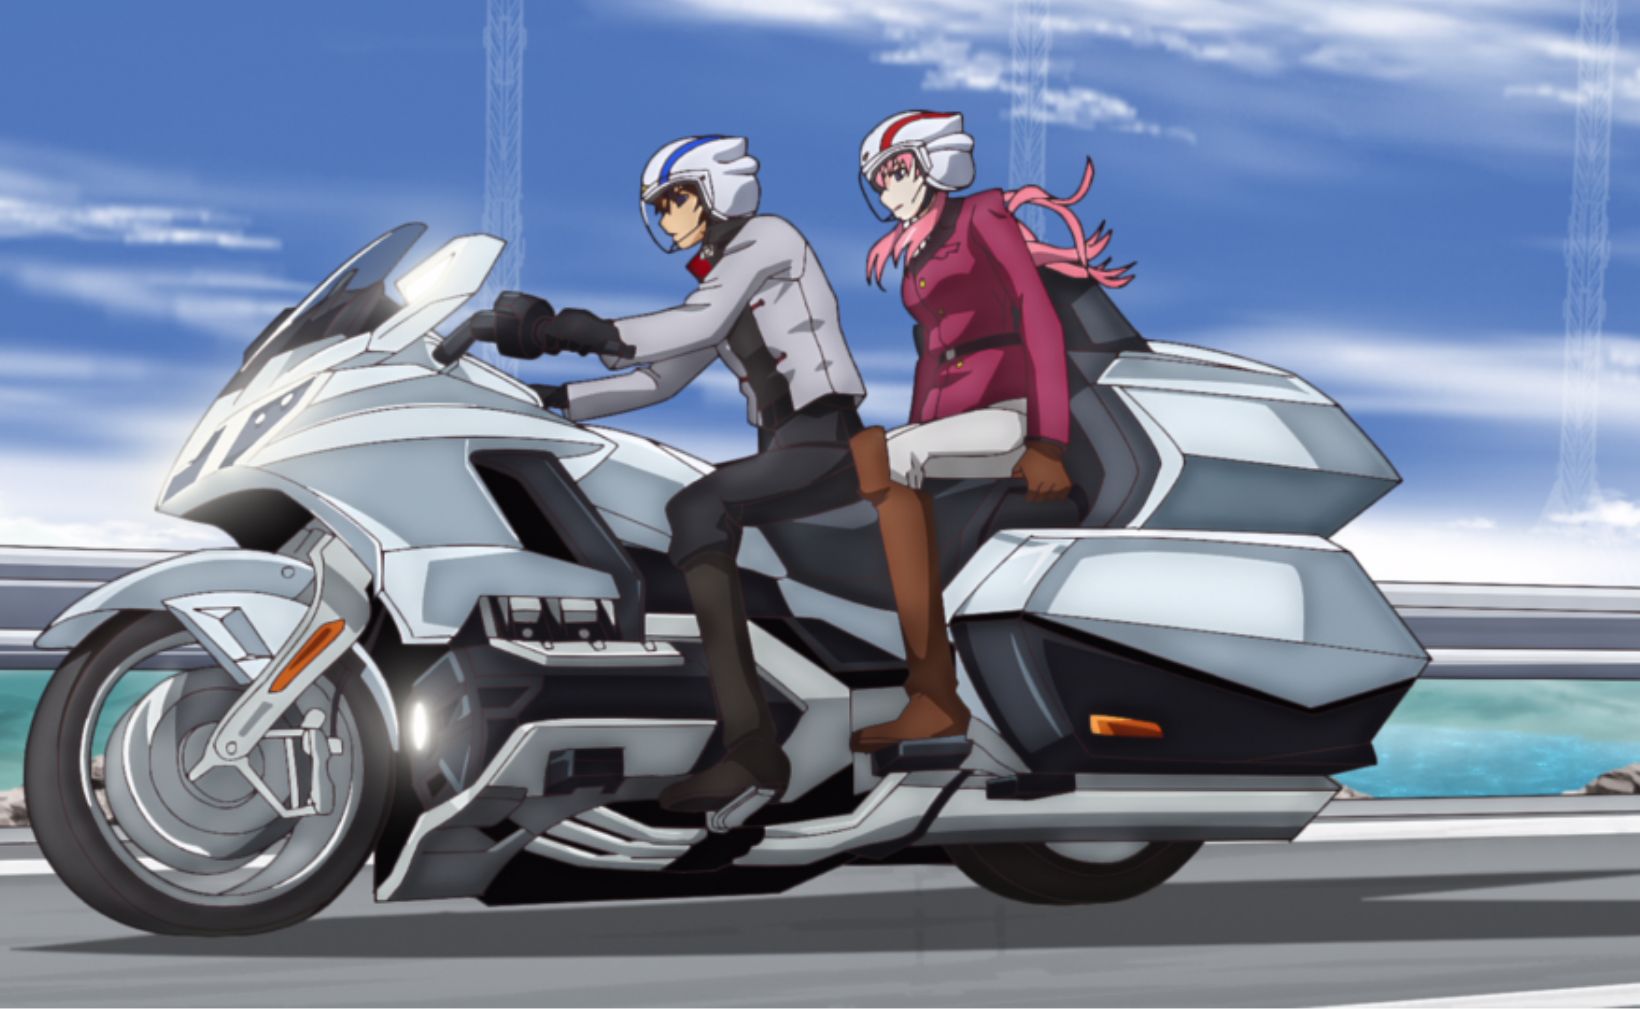 In the scene where Kira and Lacus ride the Gold Wing, helmets and wear are newly designed and drawn.